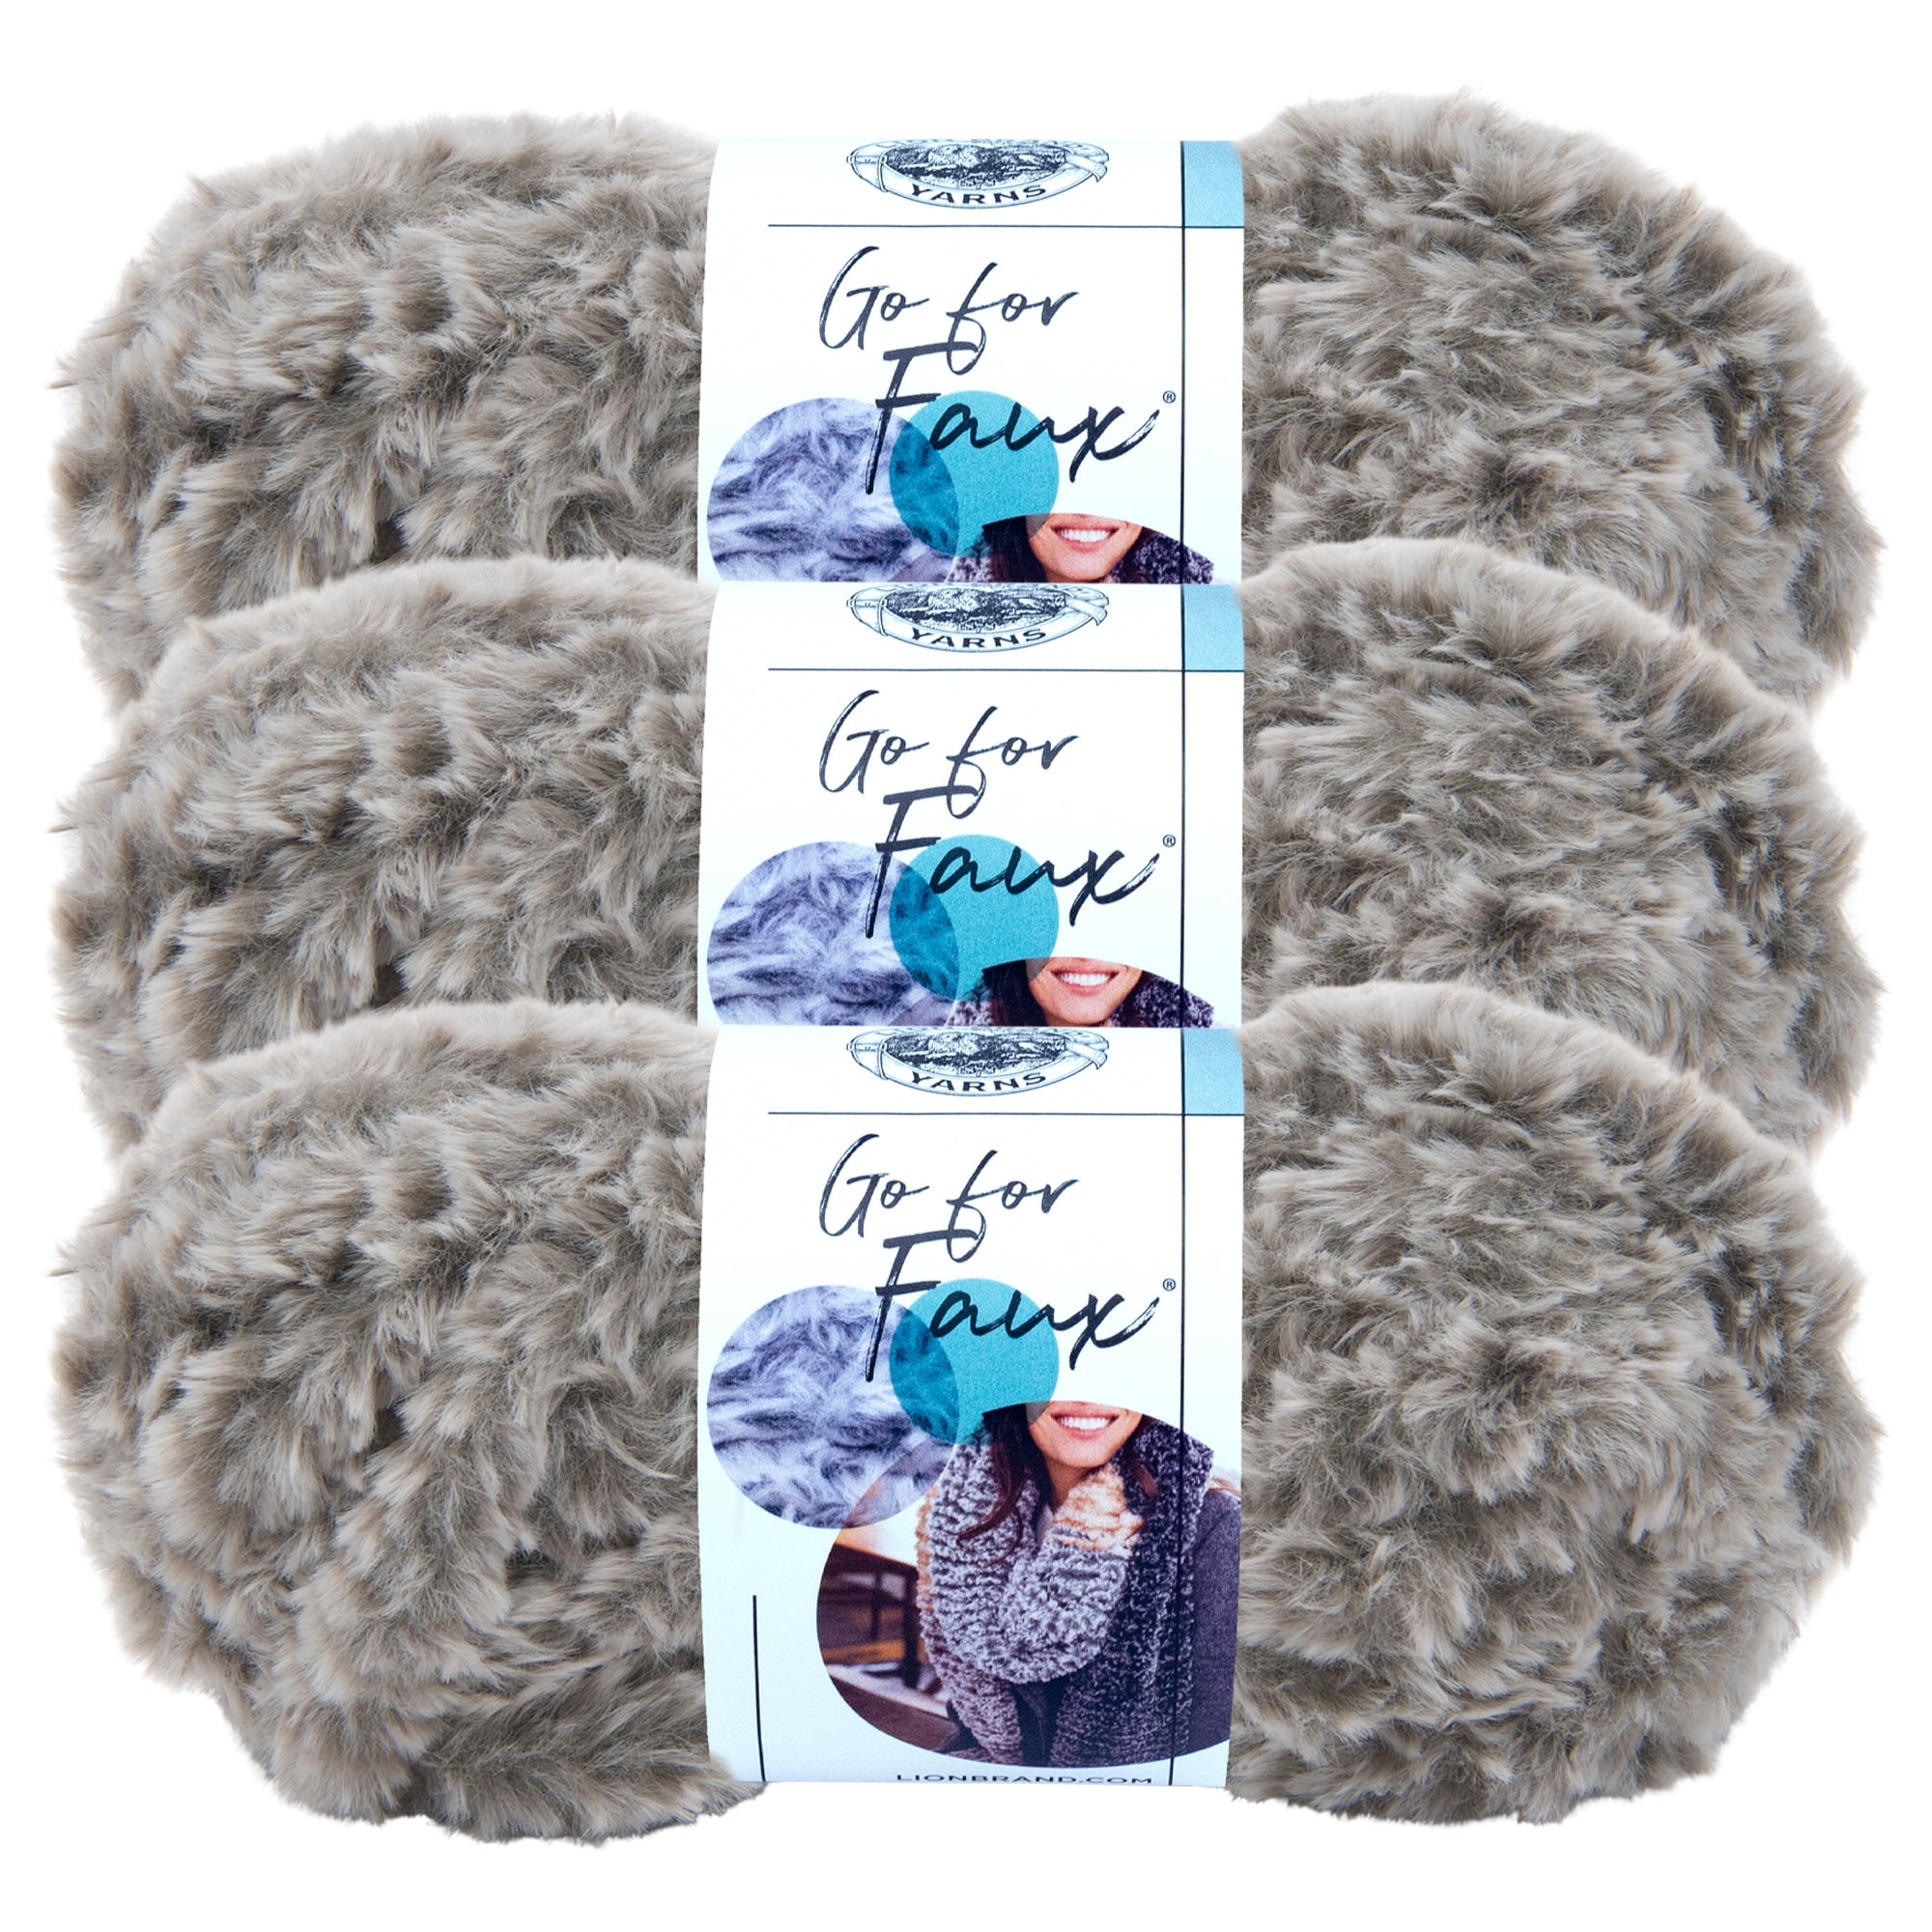 Go For Faux® Thick & Quick® Yarn – Lion Brand Yarn